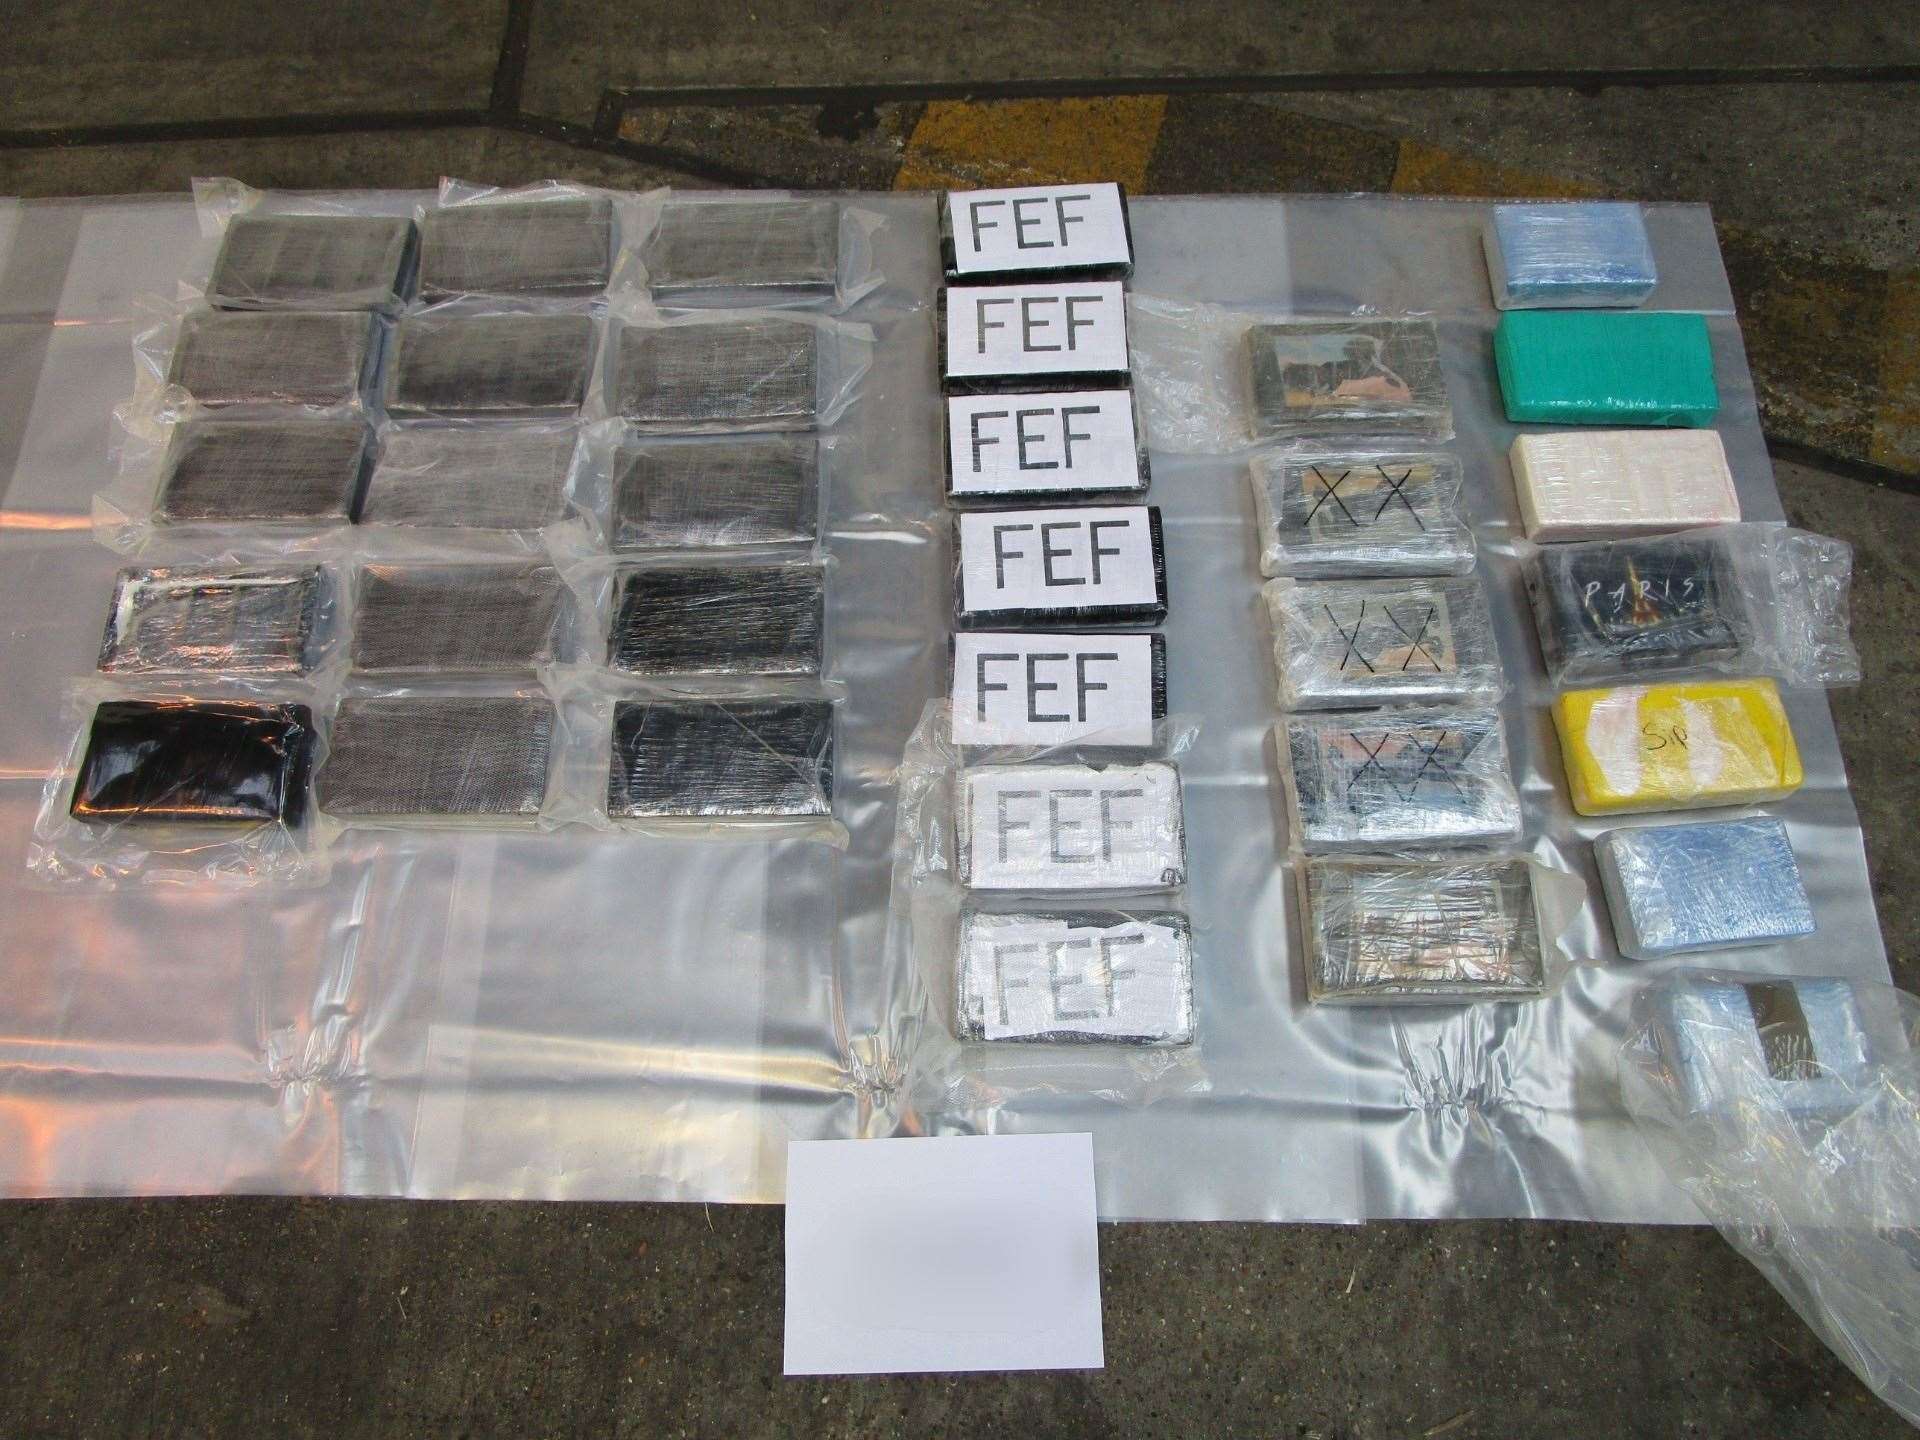 The drugs which were seized. Photo: Home Office